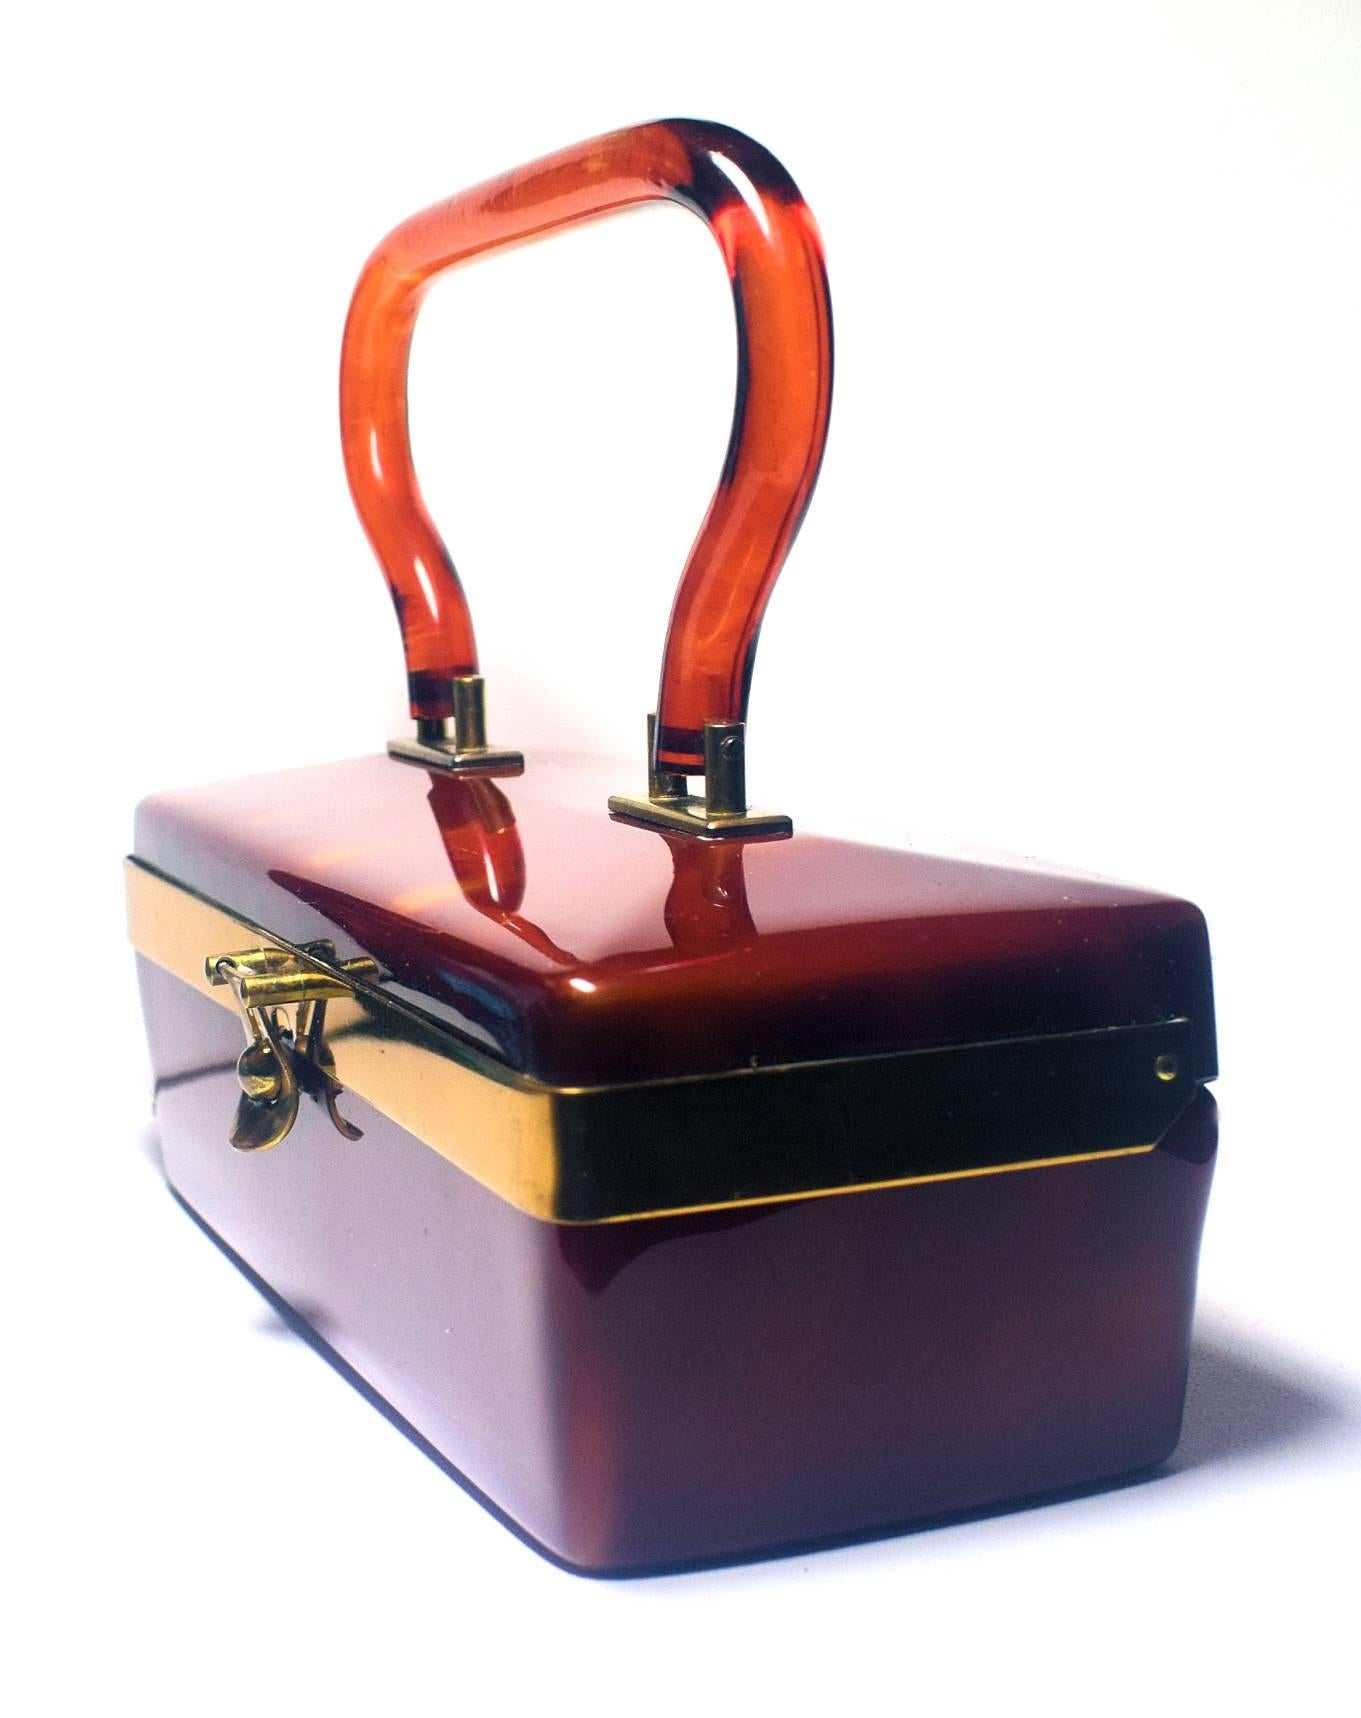 A beautiful, glossy caramel Lucite box bag. Unknown manufacturer, there are the remains of a brand on the mirror, but it is illegible. The box is completely made from a dark swirled caramel Lucite and has a brass frame.
Absolutely stunning and very